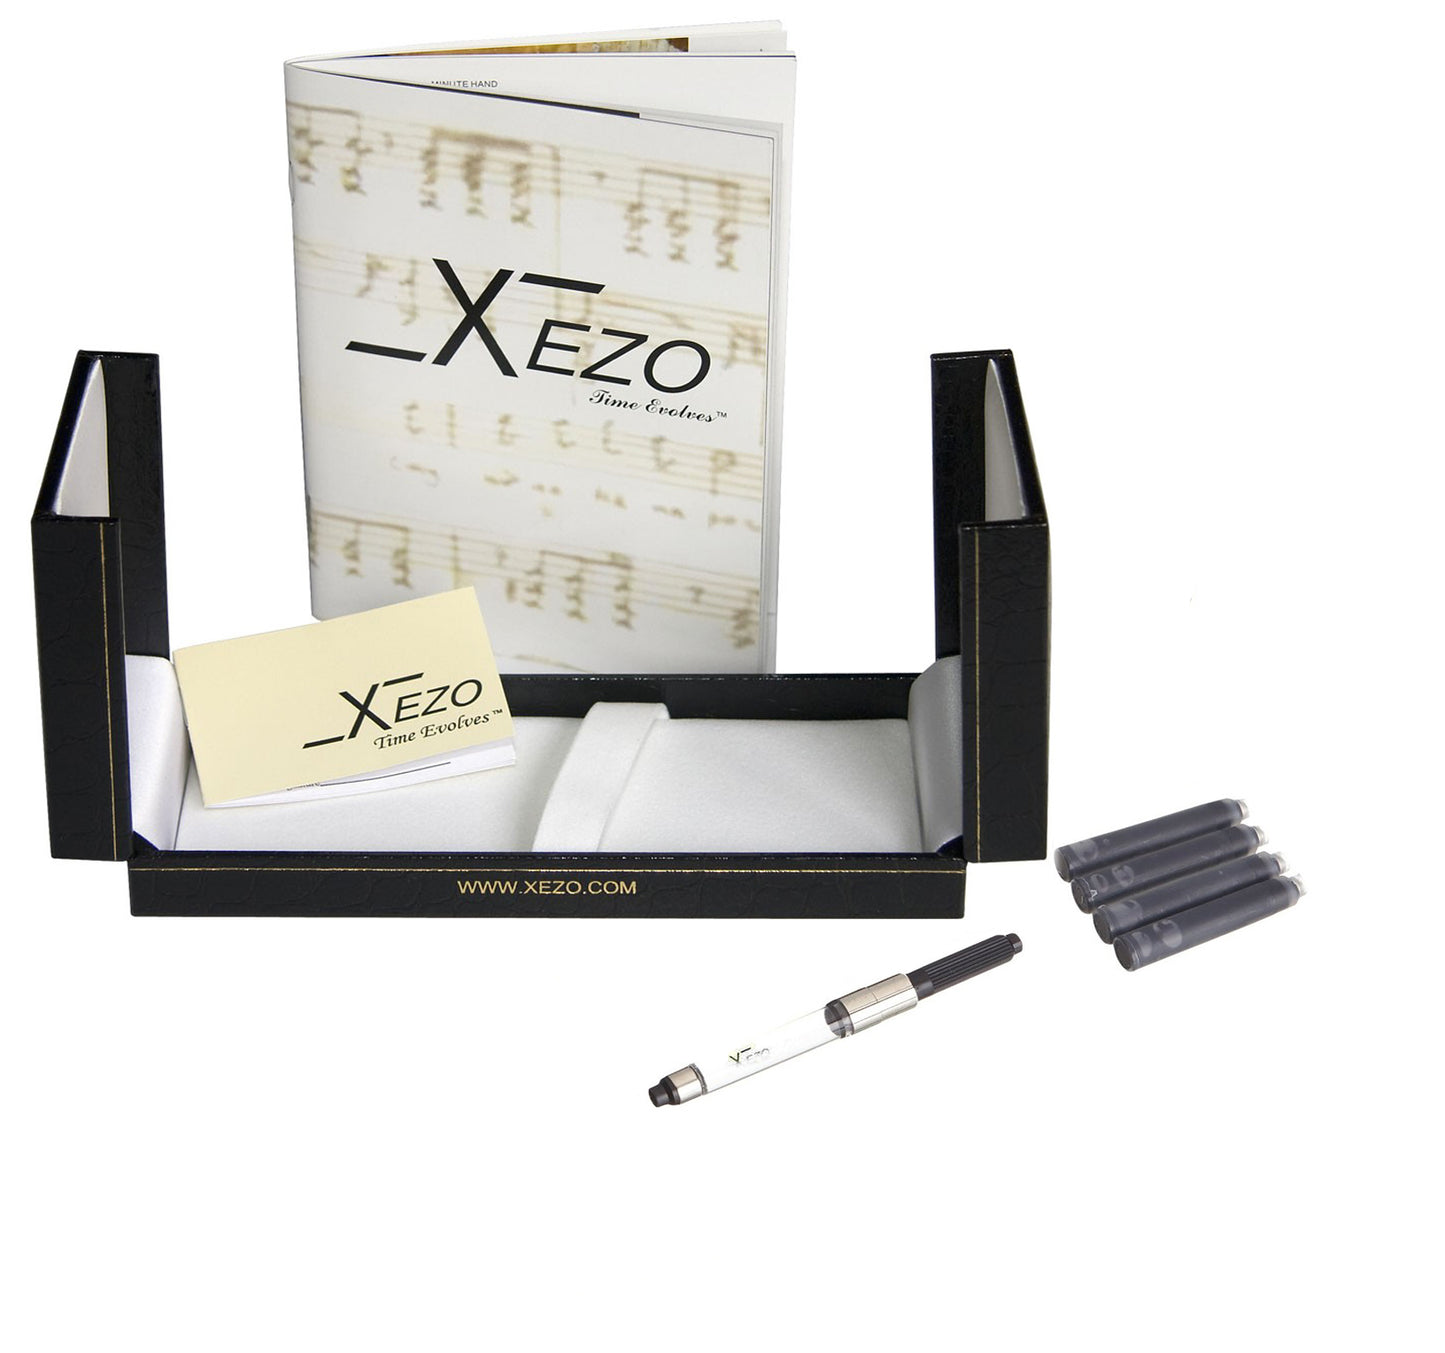 Xezo - Black gift box, certificate, manual, chrome-plated ink converter, and four ink cartridges of the Incognito Zinc FM fountain pen